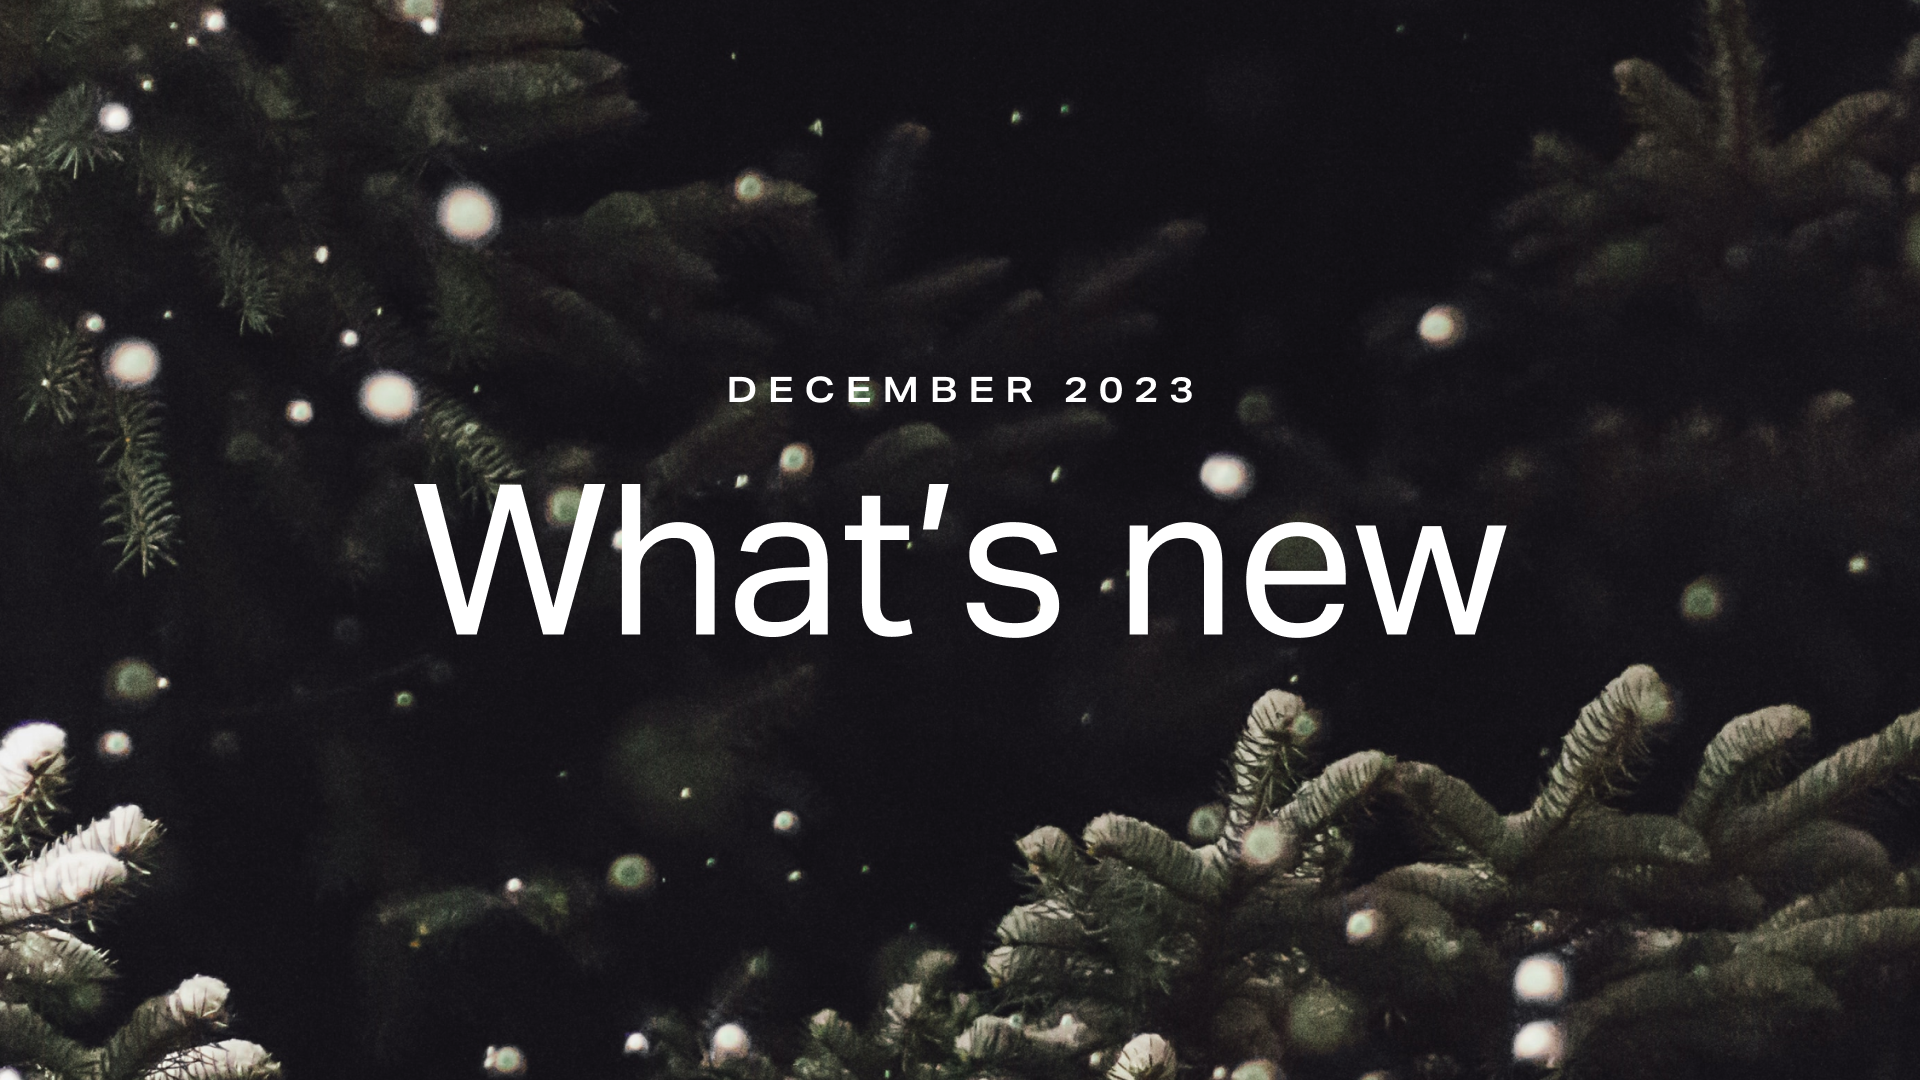 New in December 2023: RMD report, business account types, ACA integration